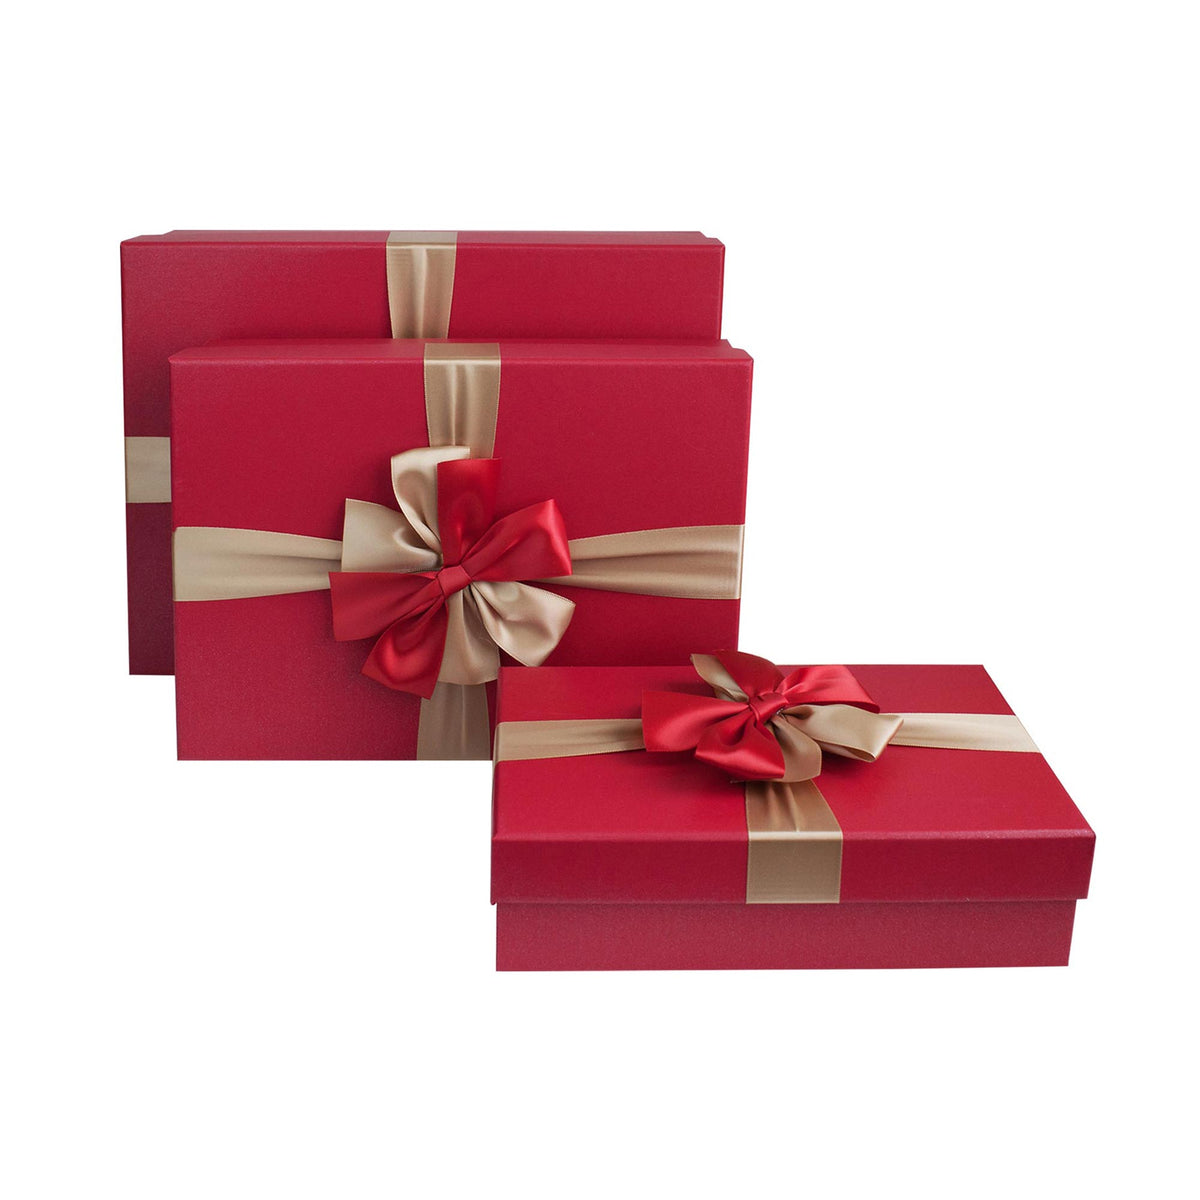 Set of 3 Red Gift Boxes with Cream Satin Ribbon (Sizes Available)